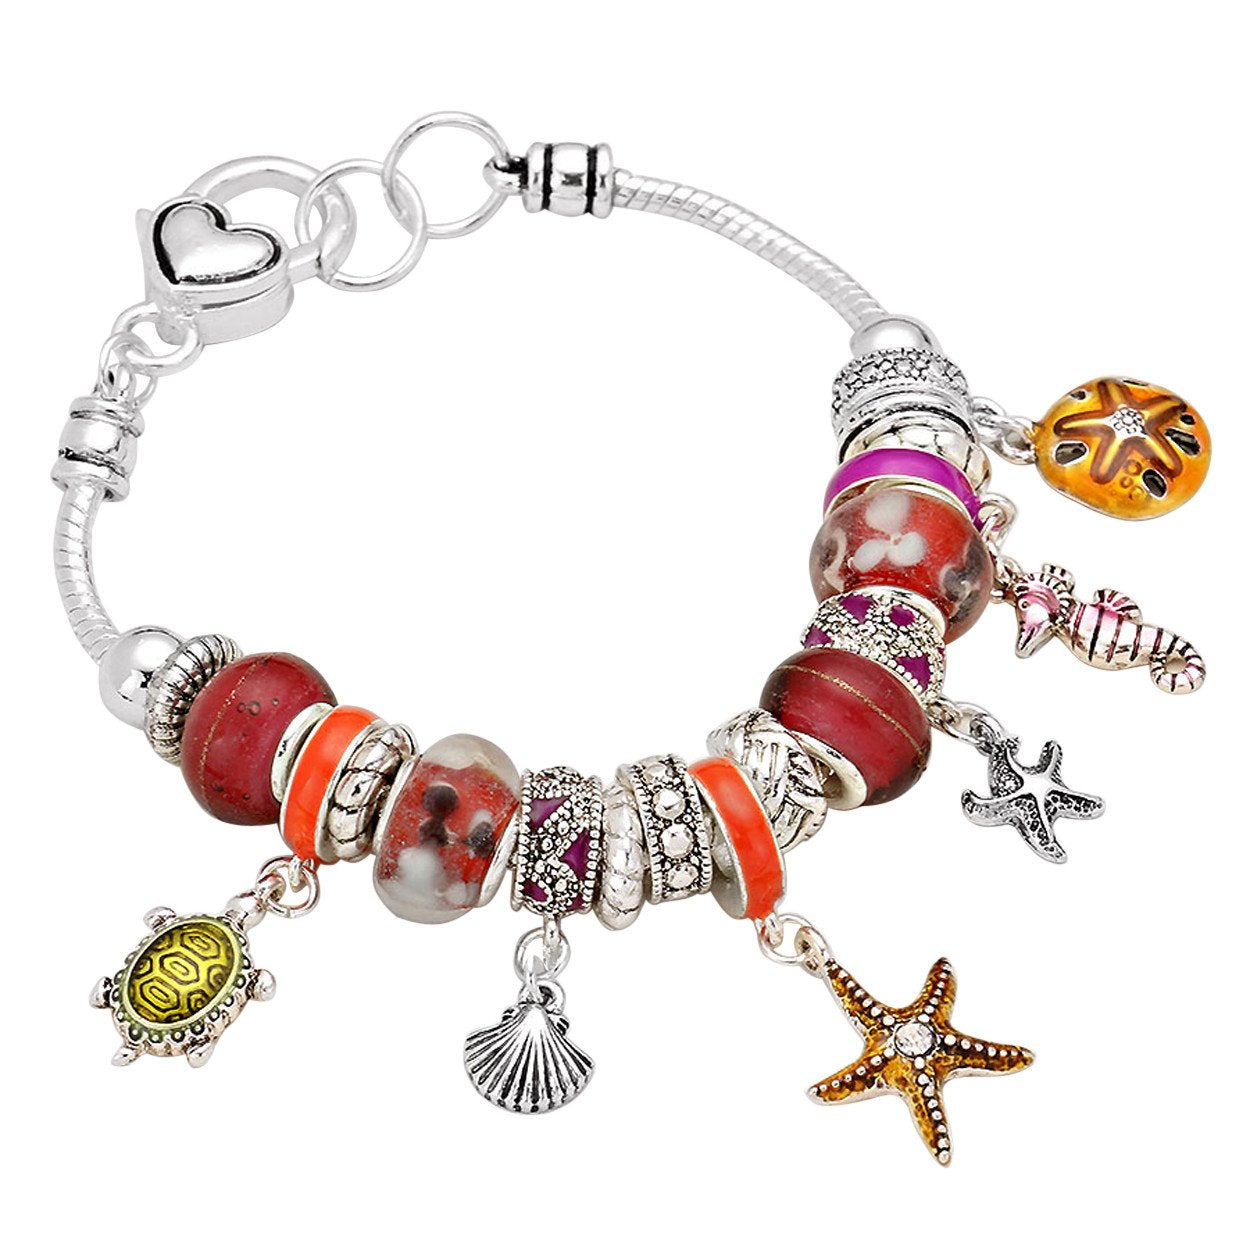 best combo  Last day to order pandora style charm bracelet is today   Link in bio          charms pandora cute jewelry  Instagram